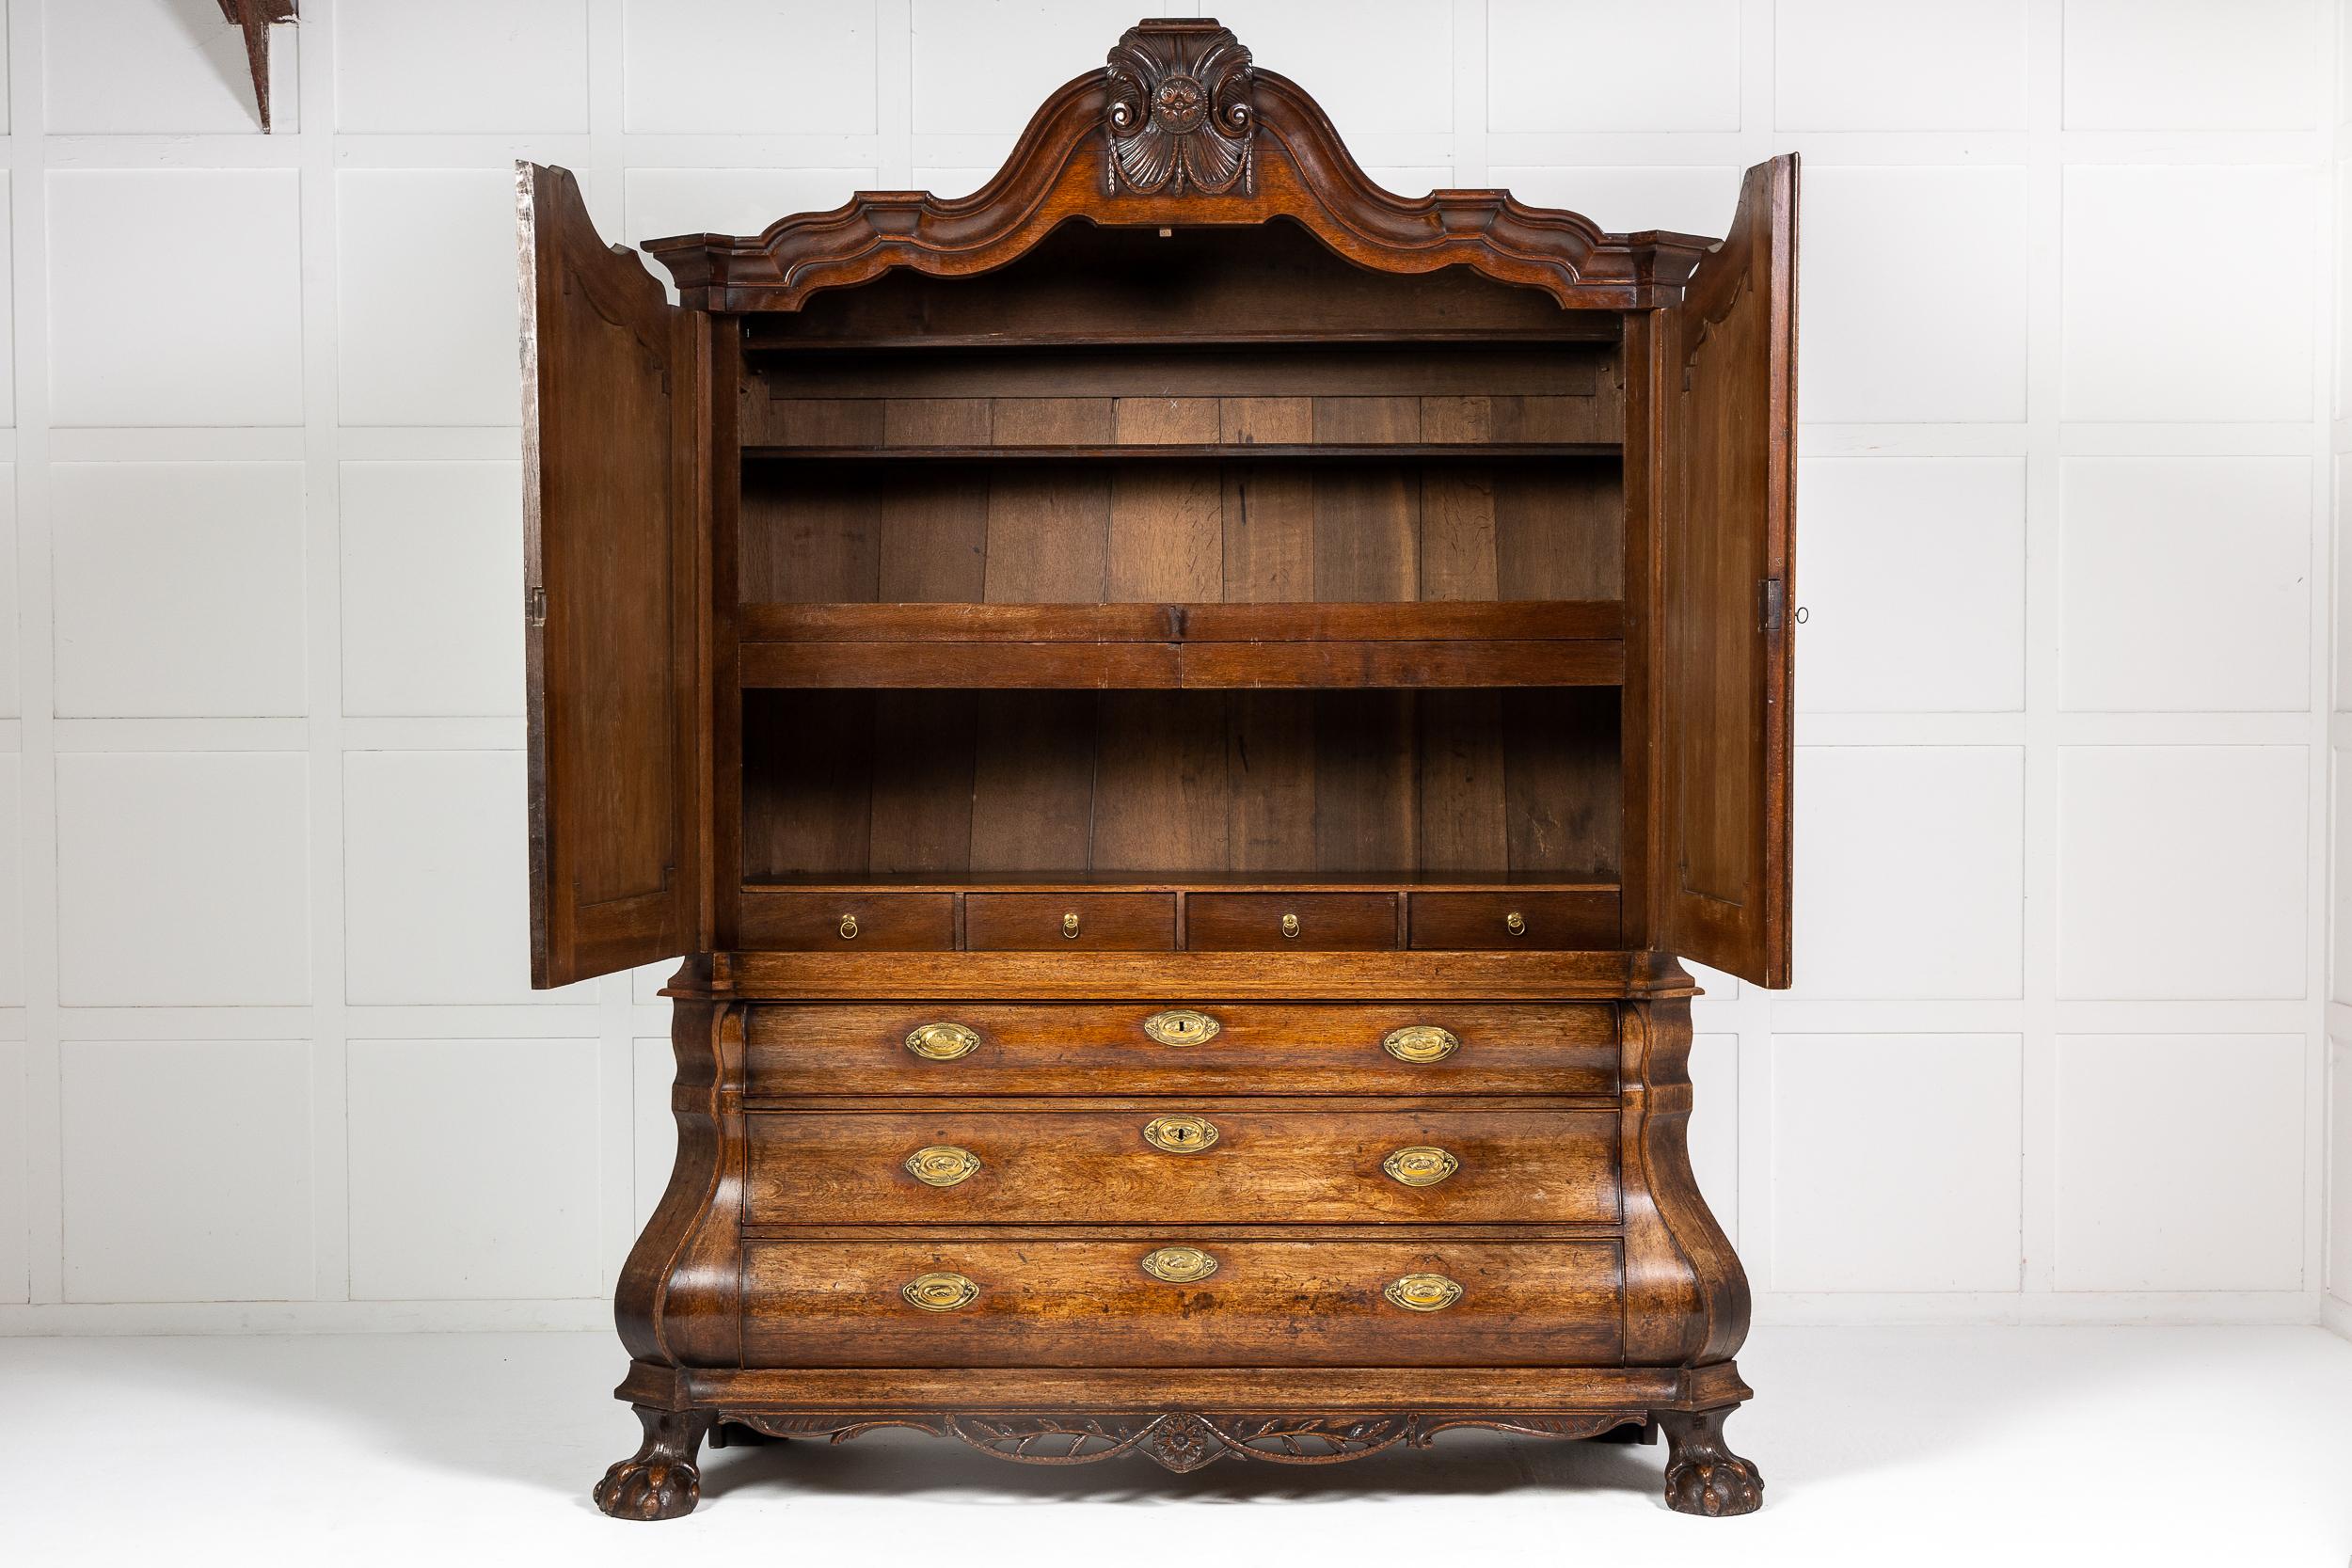 A grand scale 18th century Dutch oak Rococo bombé armoire
having a renowned shaped, wavy cornice with typical hand carved mouldings. The top half of the cabinet has two moulded panel doors with lock and key, which open to reveal a large storage